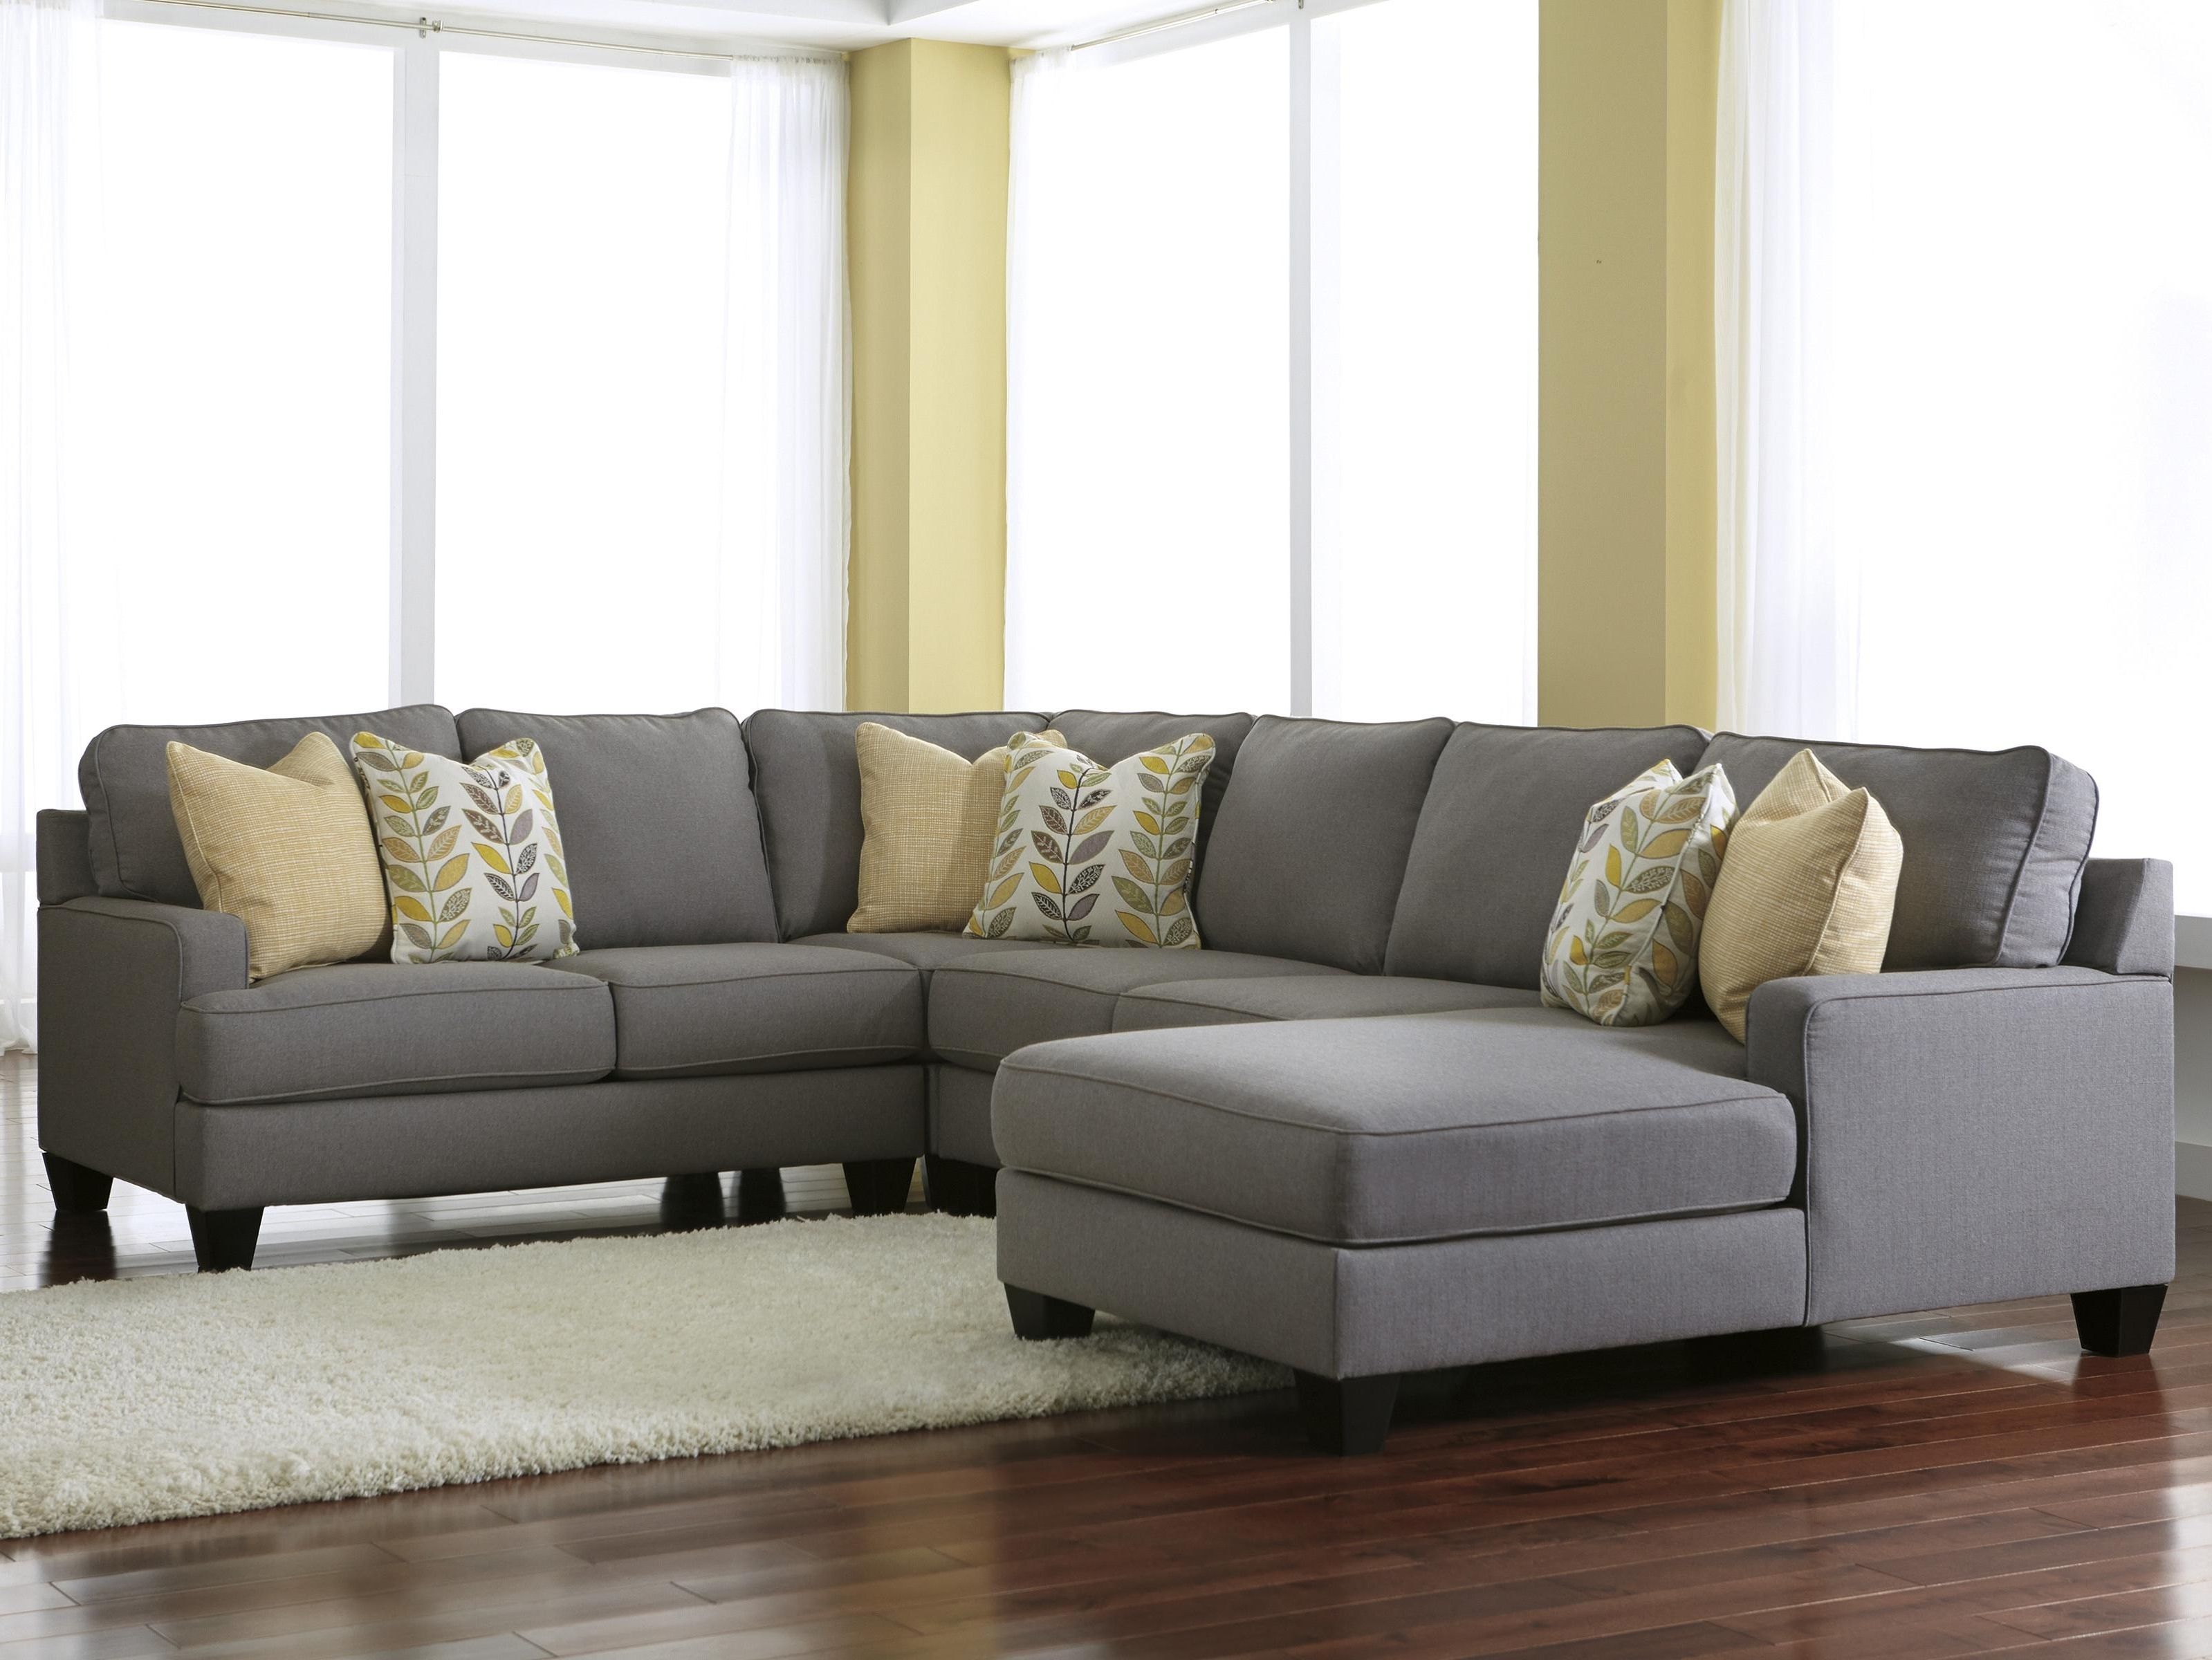 Fashionable 4 Piece Sectional Sofas With Chaise Pertaining To Modern 4 Piece Sectional Sofa With Left Chaise & Reversible Seat (View 1 of 15)